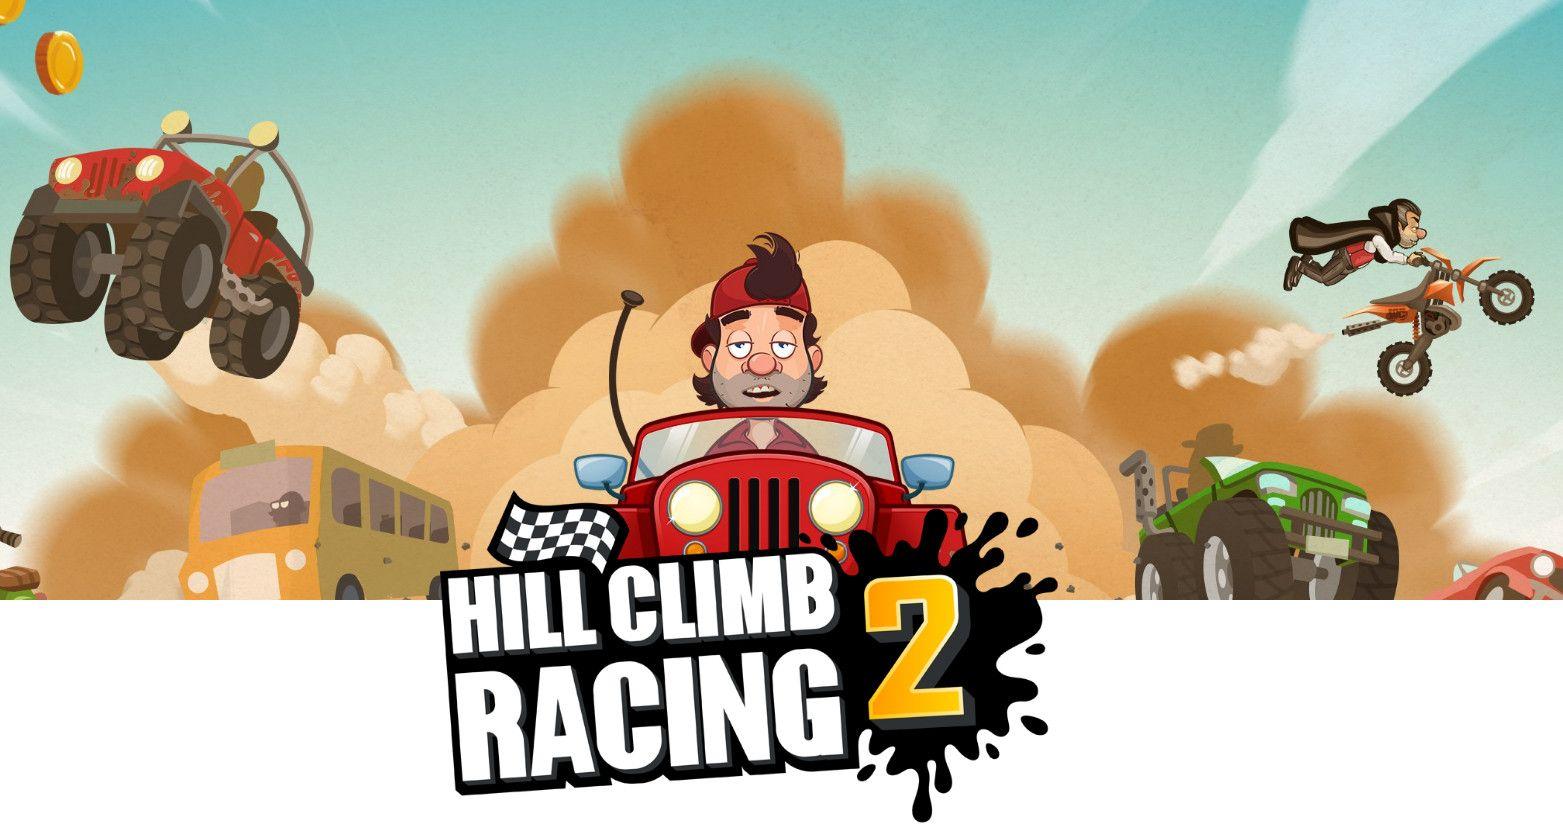 hill climb racing 2 sync between devices